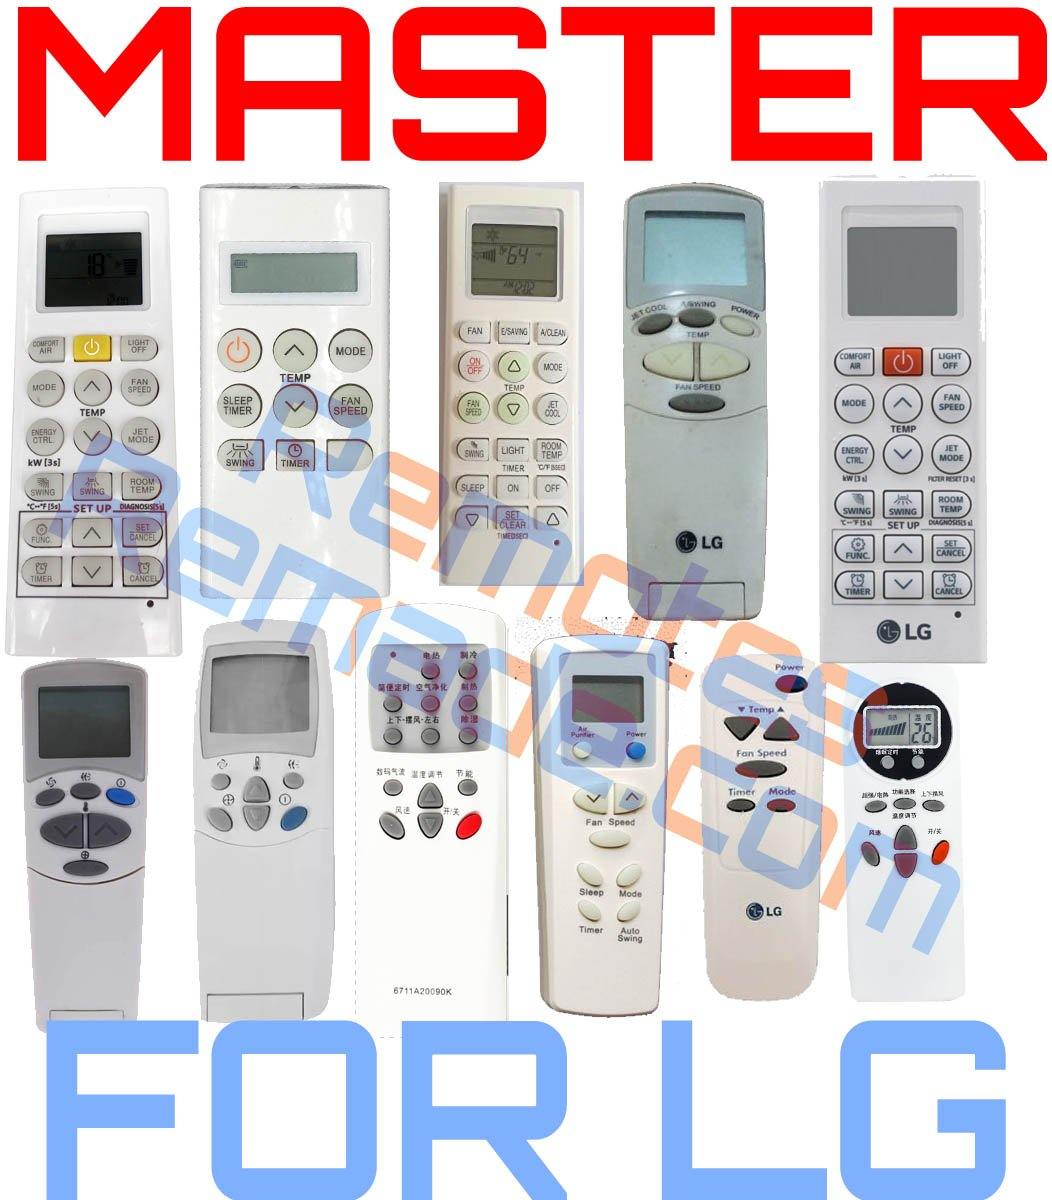 MASTER UNIVERSAL General Electric AIR CONDITIONER REMOTE